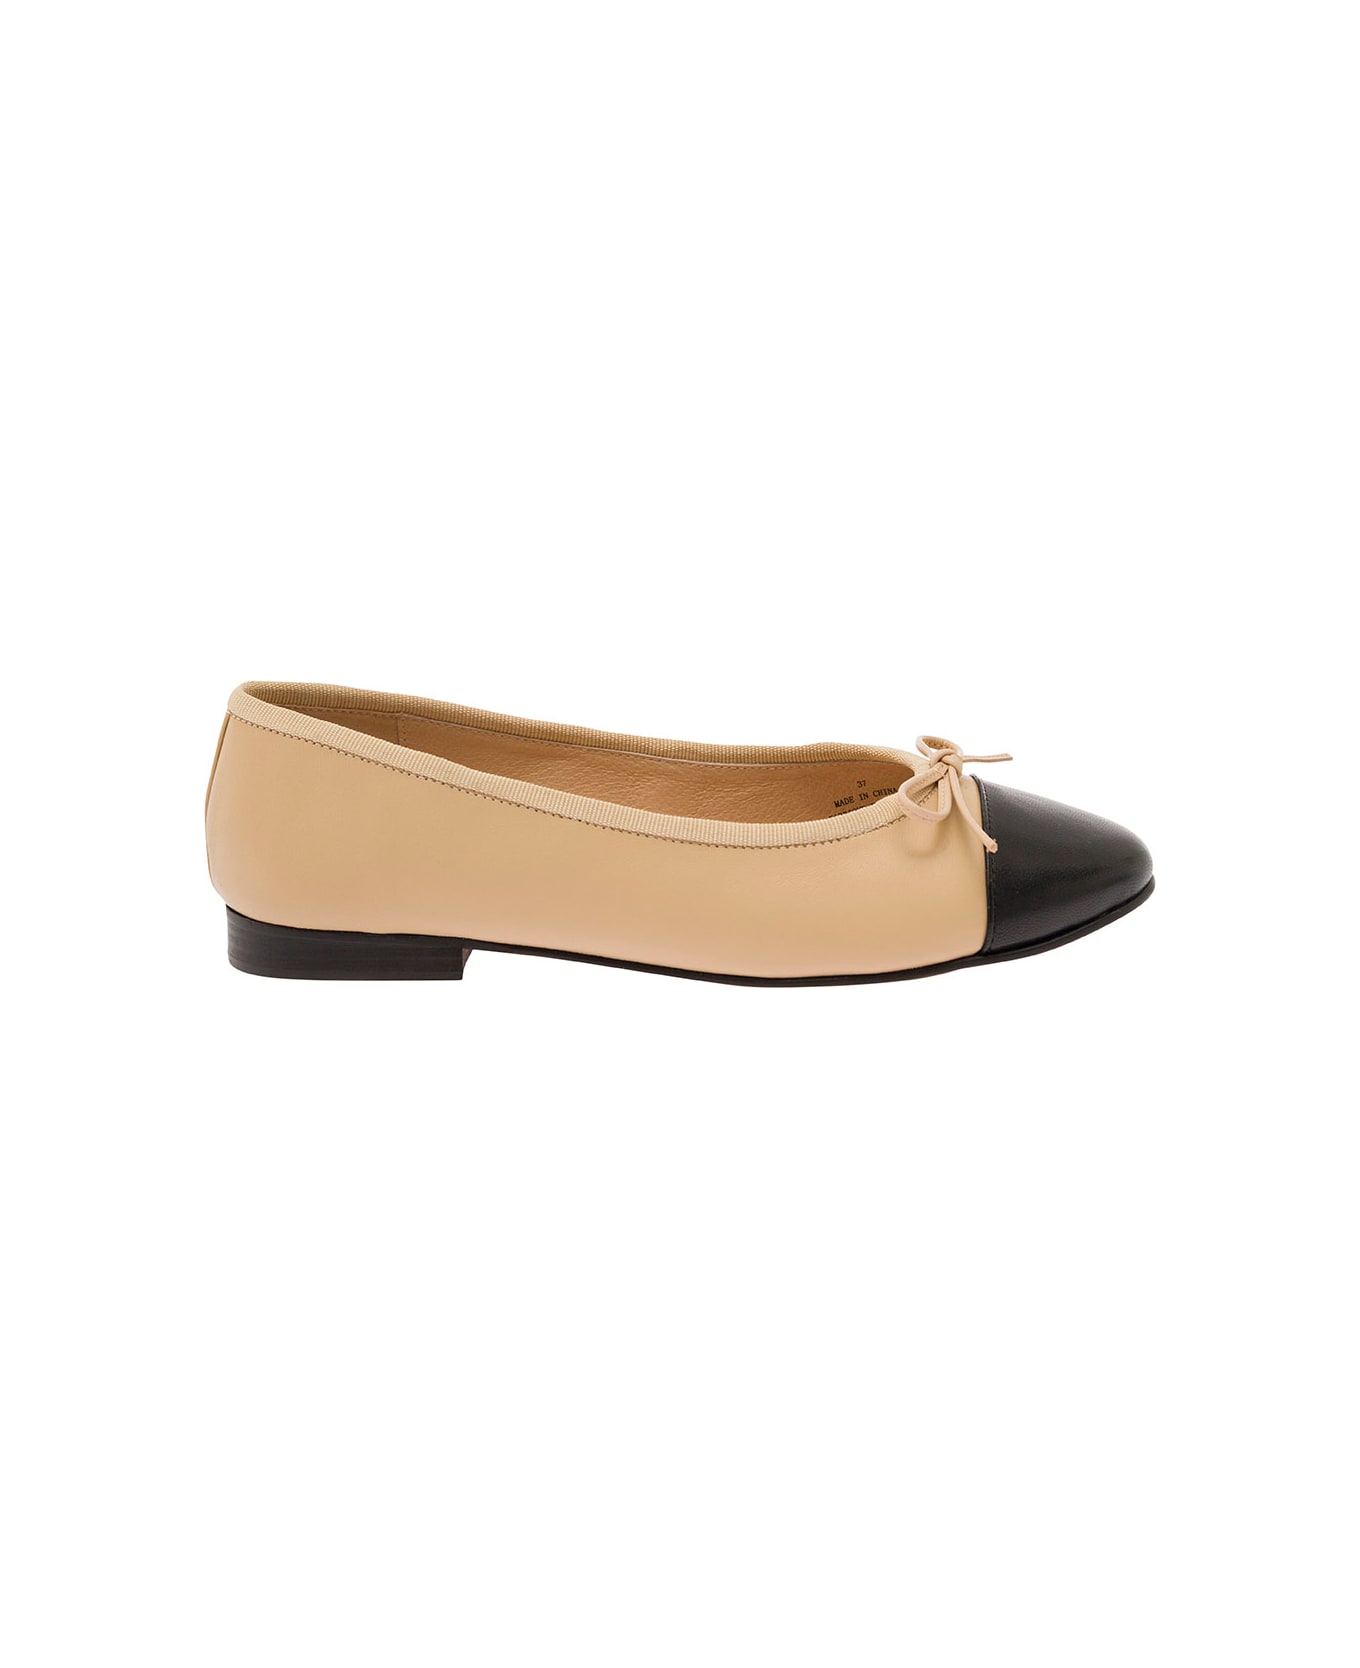 Jeffrey Campbell Beige Ballet Flats With Contrasting Toe And Bow In Leather Woman - Beige